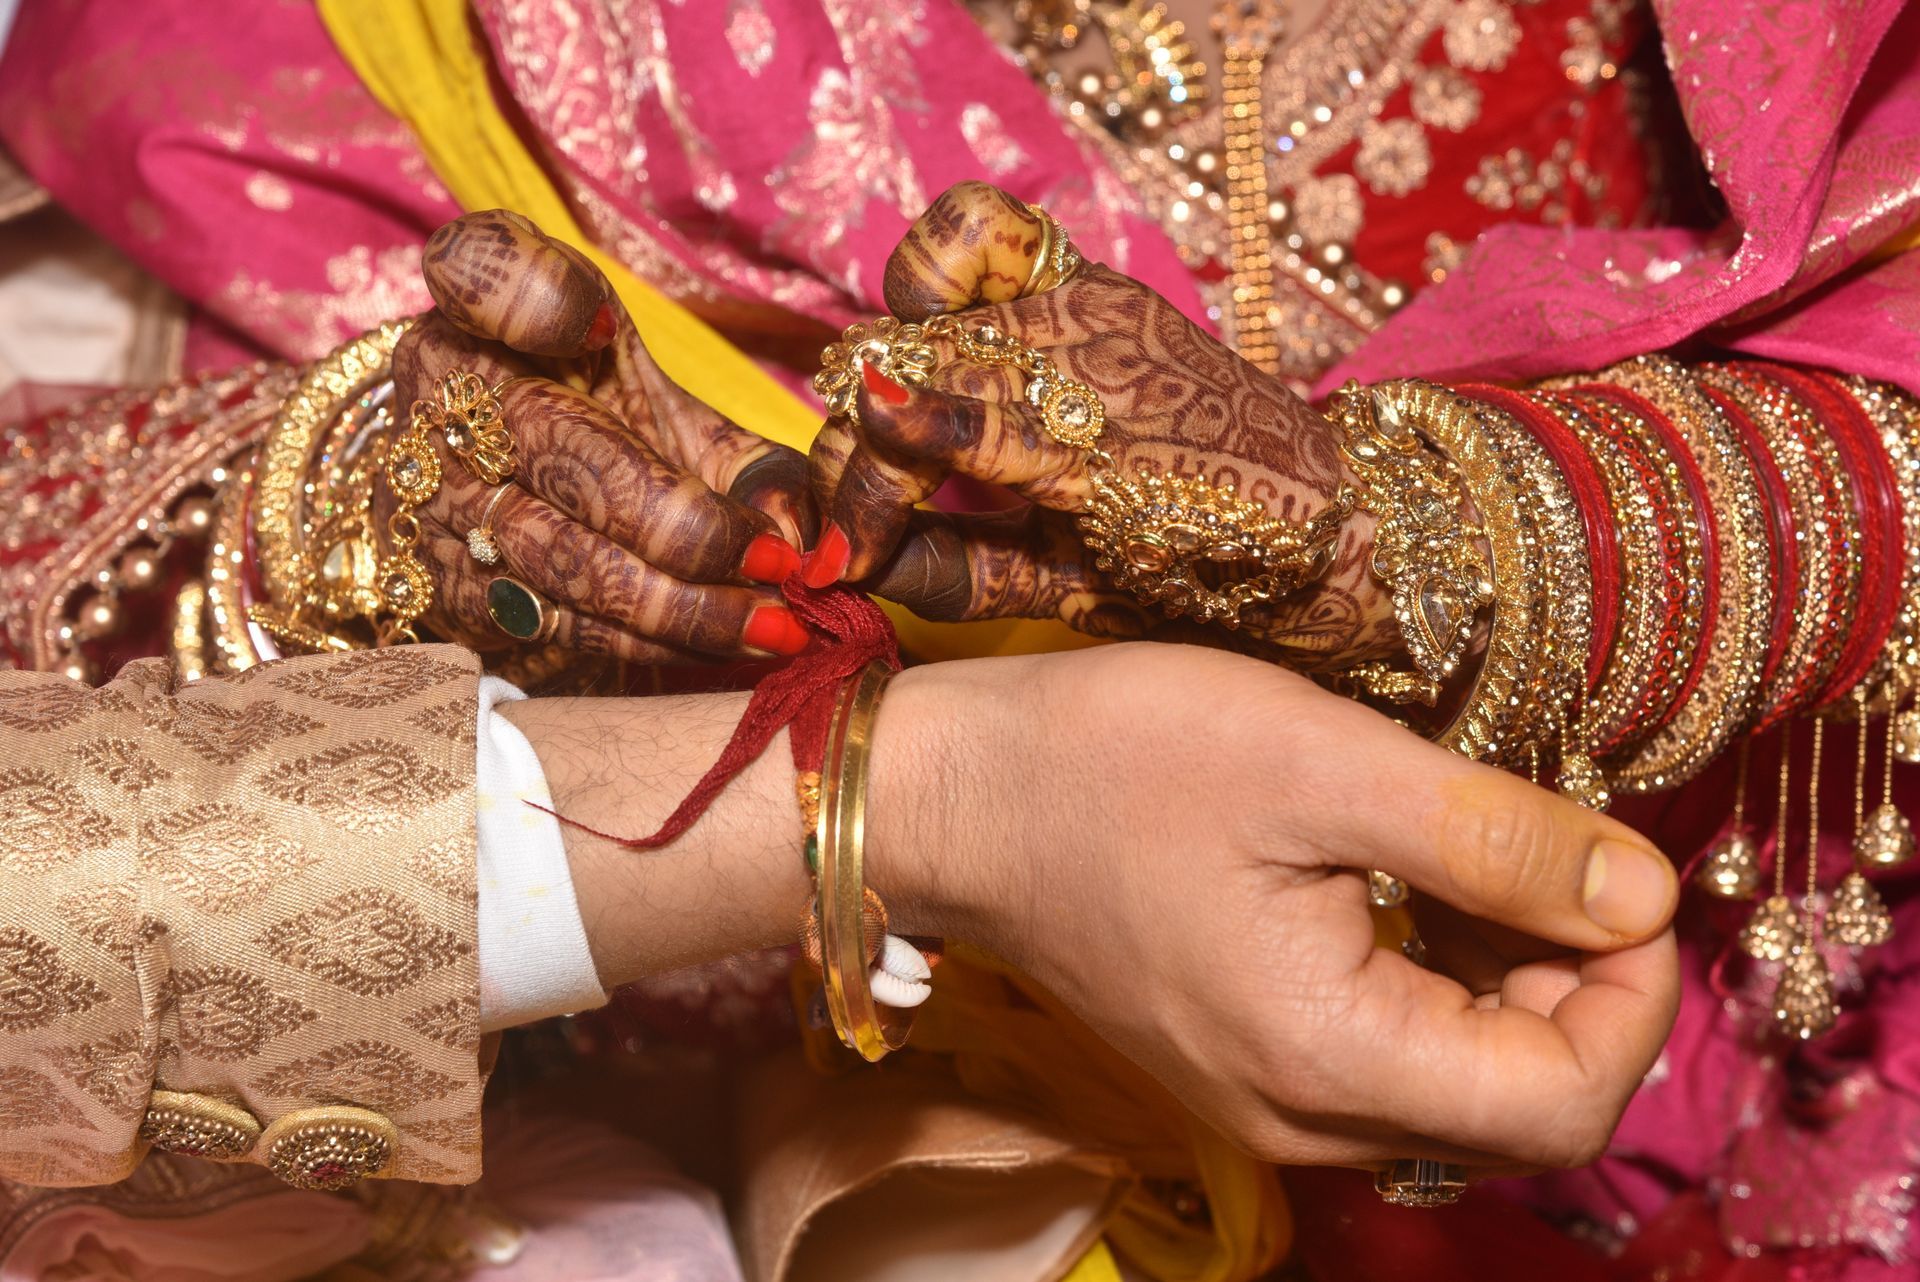 bride groom meaning : Latest News, Photos, Videos on bride groom meaning by  IBC24.in